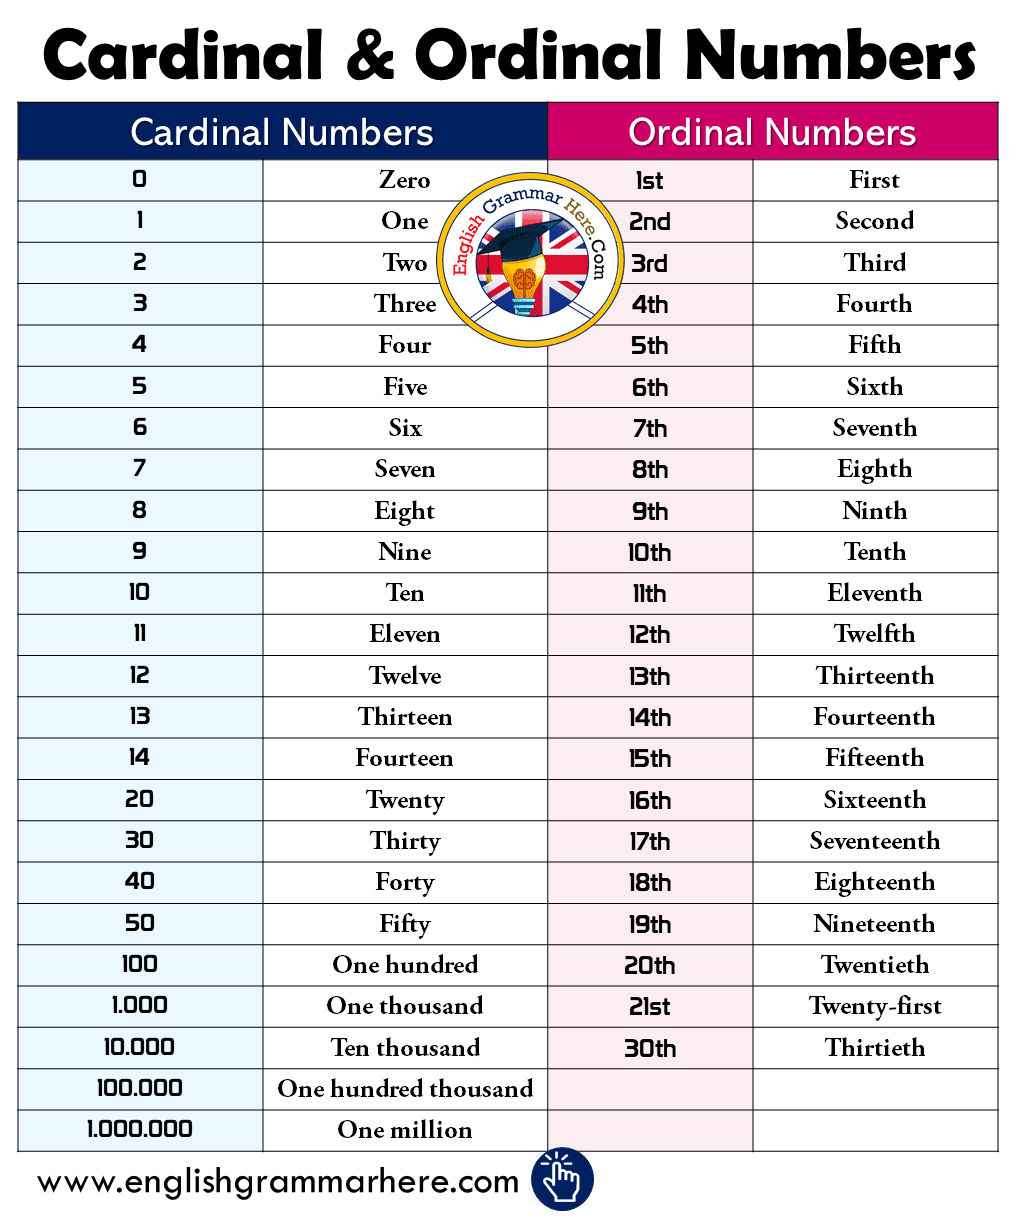 Ordinal Numbers Table